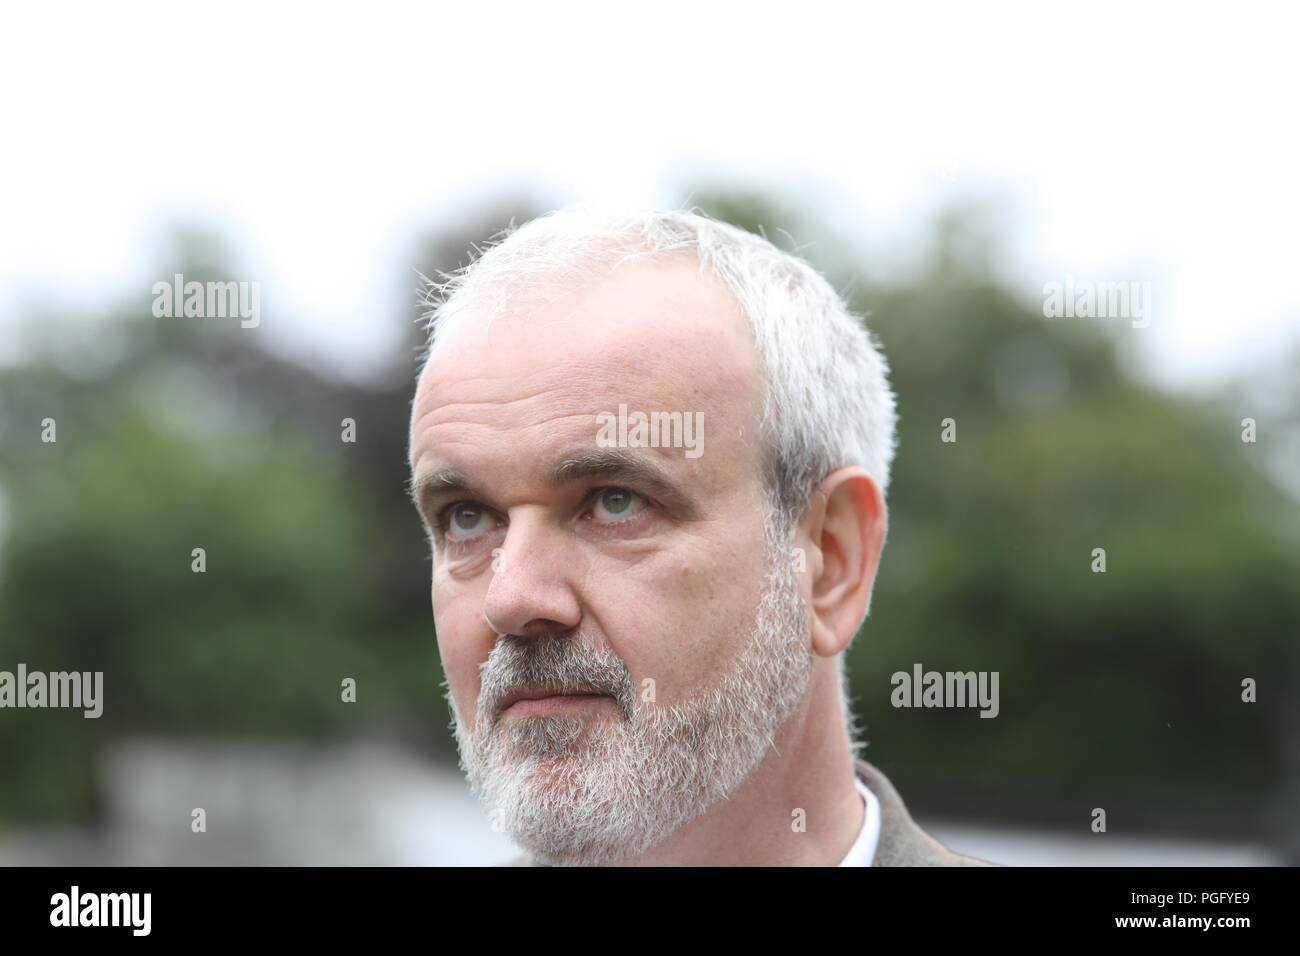 26/08/2018 Visit of Pope Francis to Ireland. Pictured is Colm O'Gorman, Executive Director of Amnesty International Ireland, who took part in the Stand4Truth solidarity march for victims of clerical abuse today, coinciding with Pope Francis' Mass in Dublin's Phoenix Park. The march began at the Garden of Remembrance in Dublin. The visit of Pope Francis comes soon after the most recent clerical abuse controversy to rock the Church, as a report claimed that over 300 priests who abused more than 1,000 children in Pennsylvania were protected by the Church - in addition to recent Irish scandals inc Stock Photo